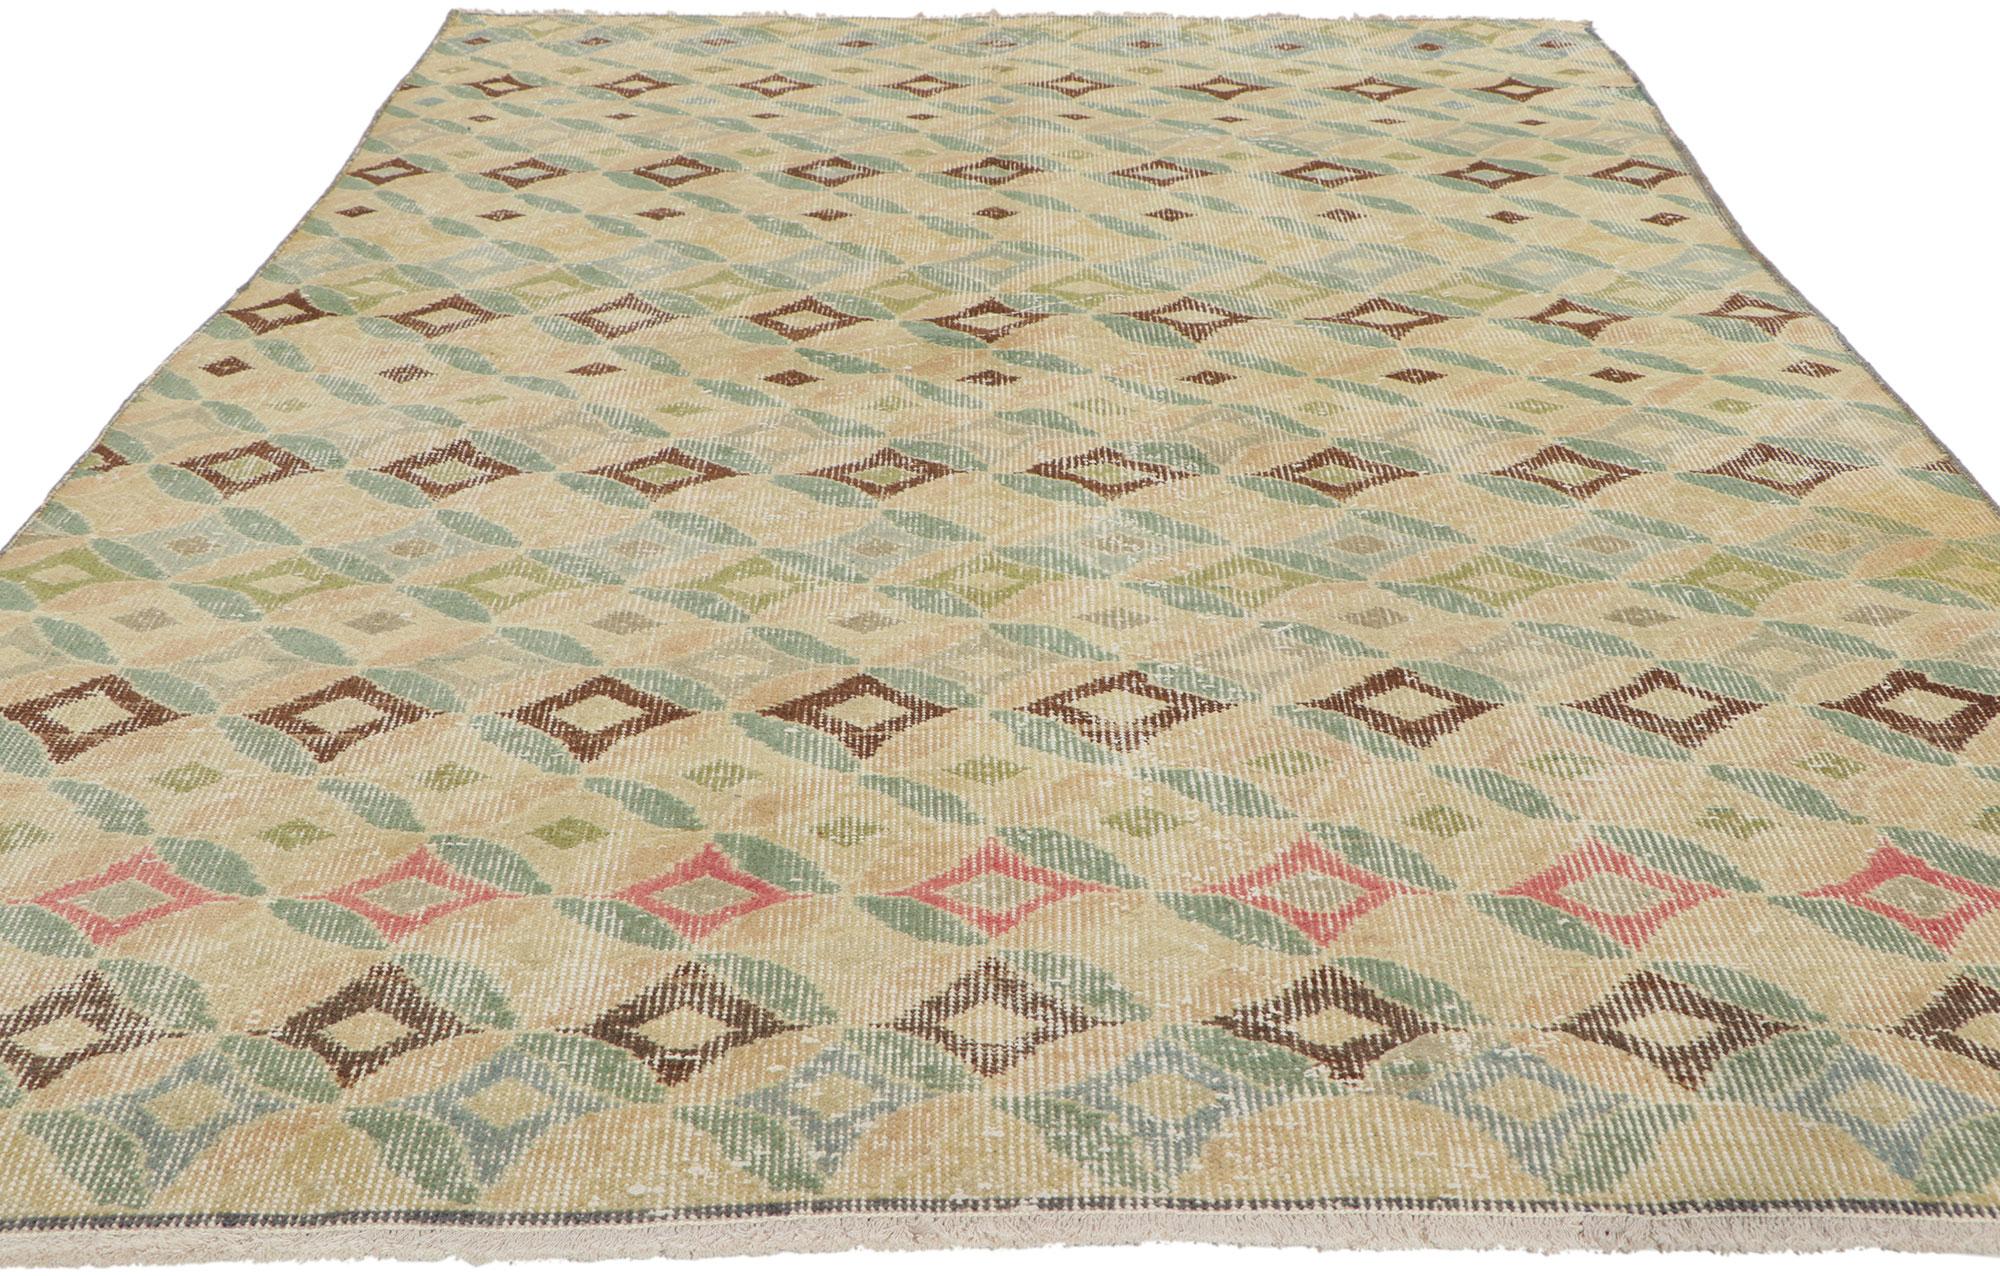 Hand-Knotted Rustic Vintage Distressed Turkish Sivas Rug with Faded Earth-Tone Colors For Sale